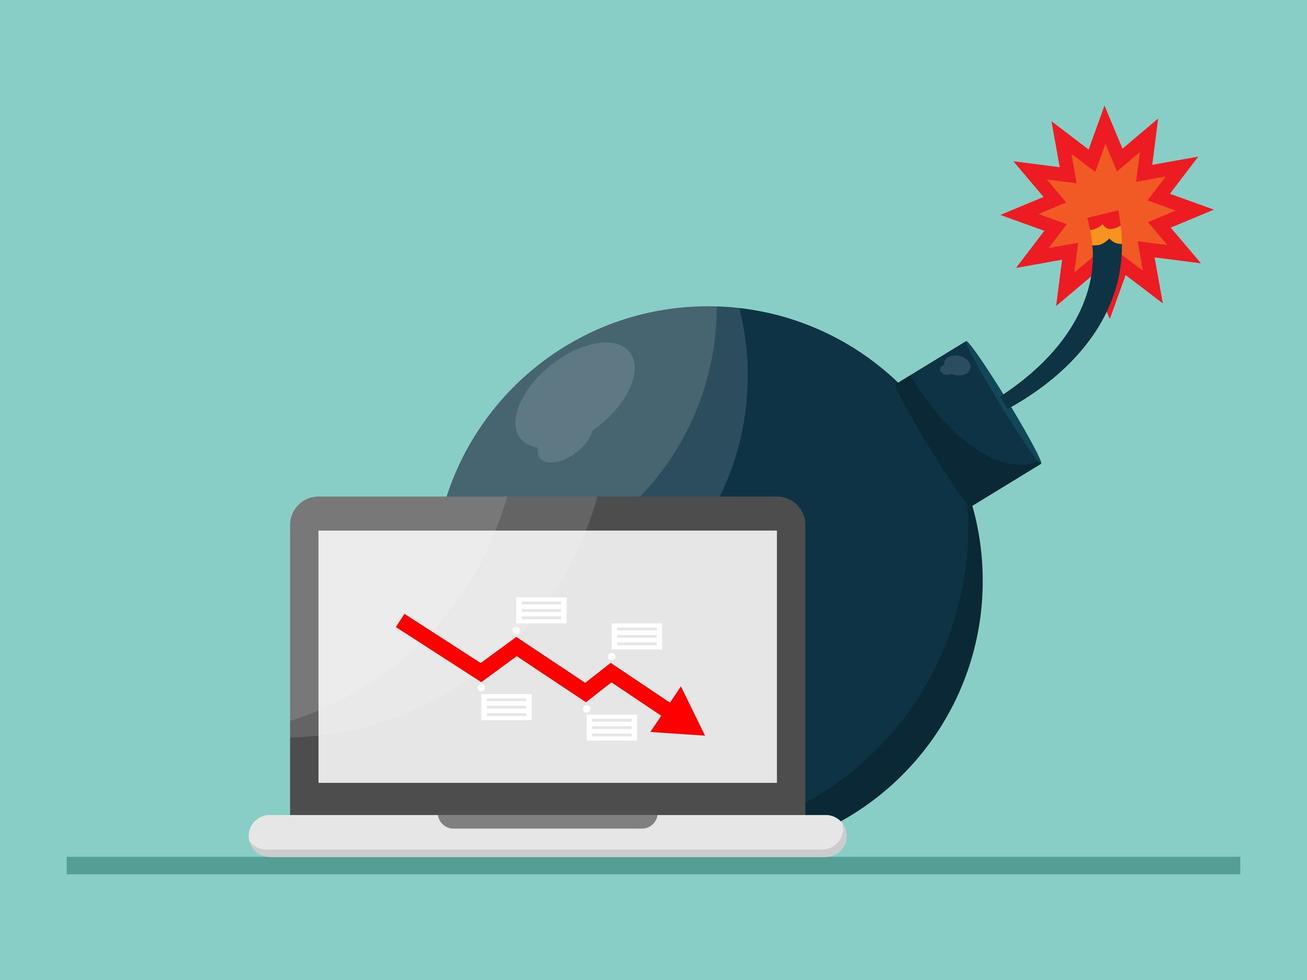 big bomb with red arrow falls down on laptop screen vector